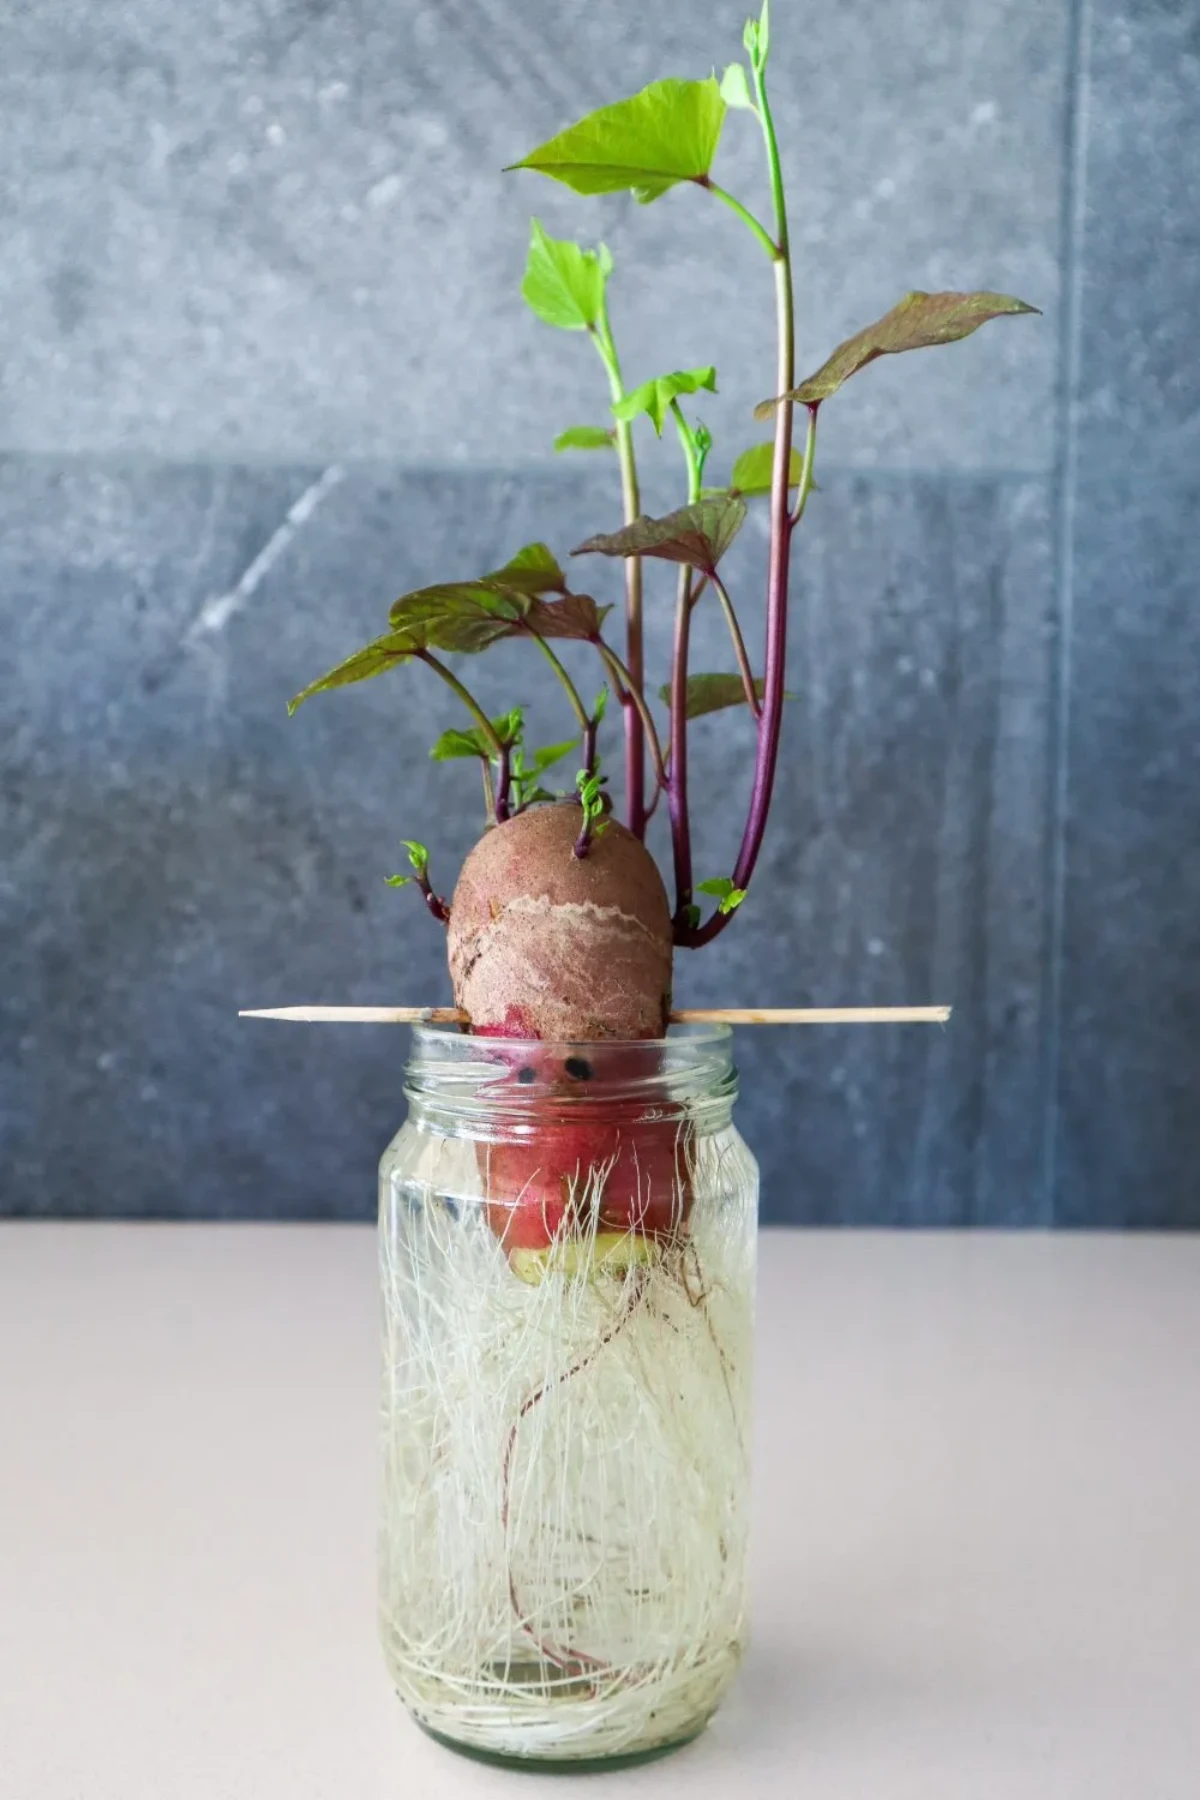 vegetables you can regrow from scraps growing a sweet potato at home